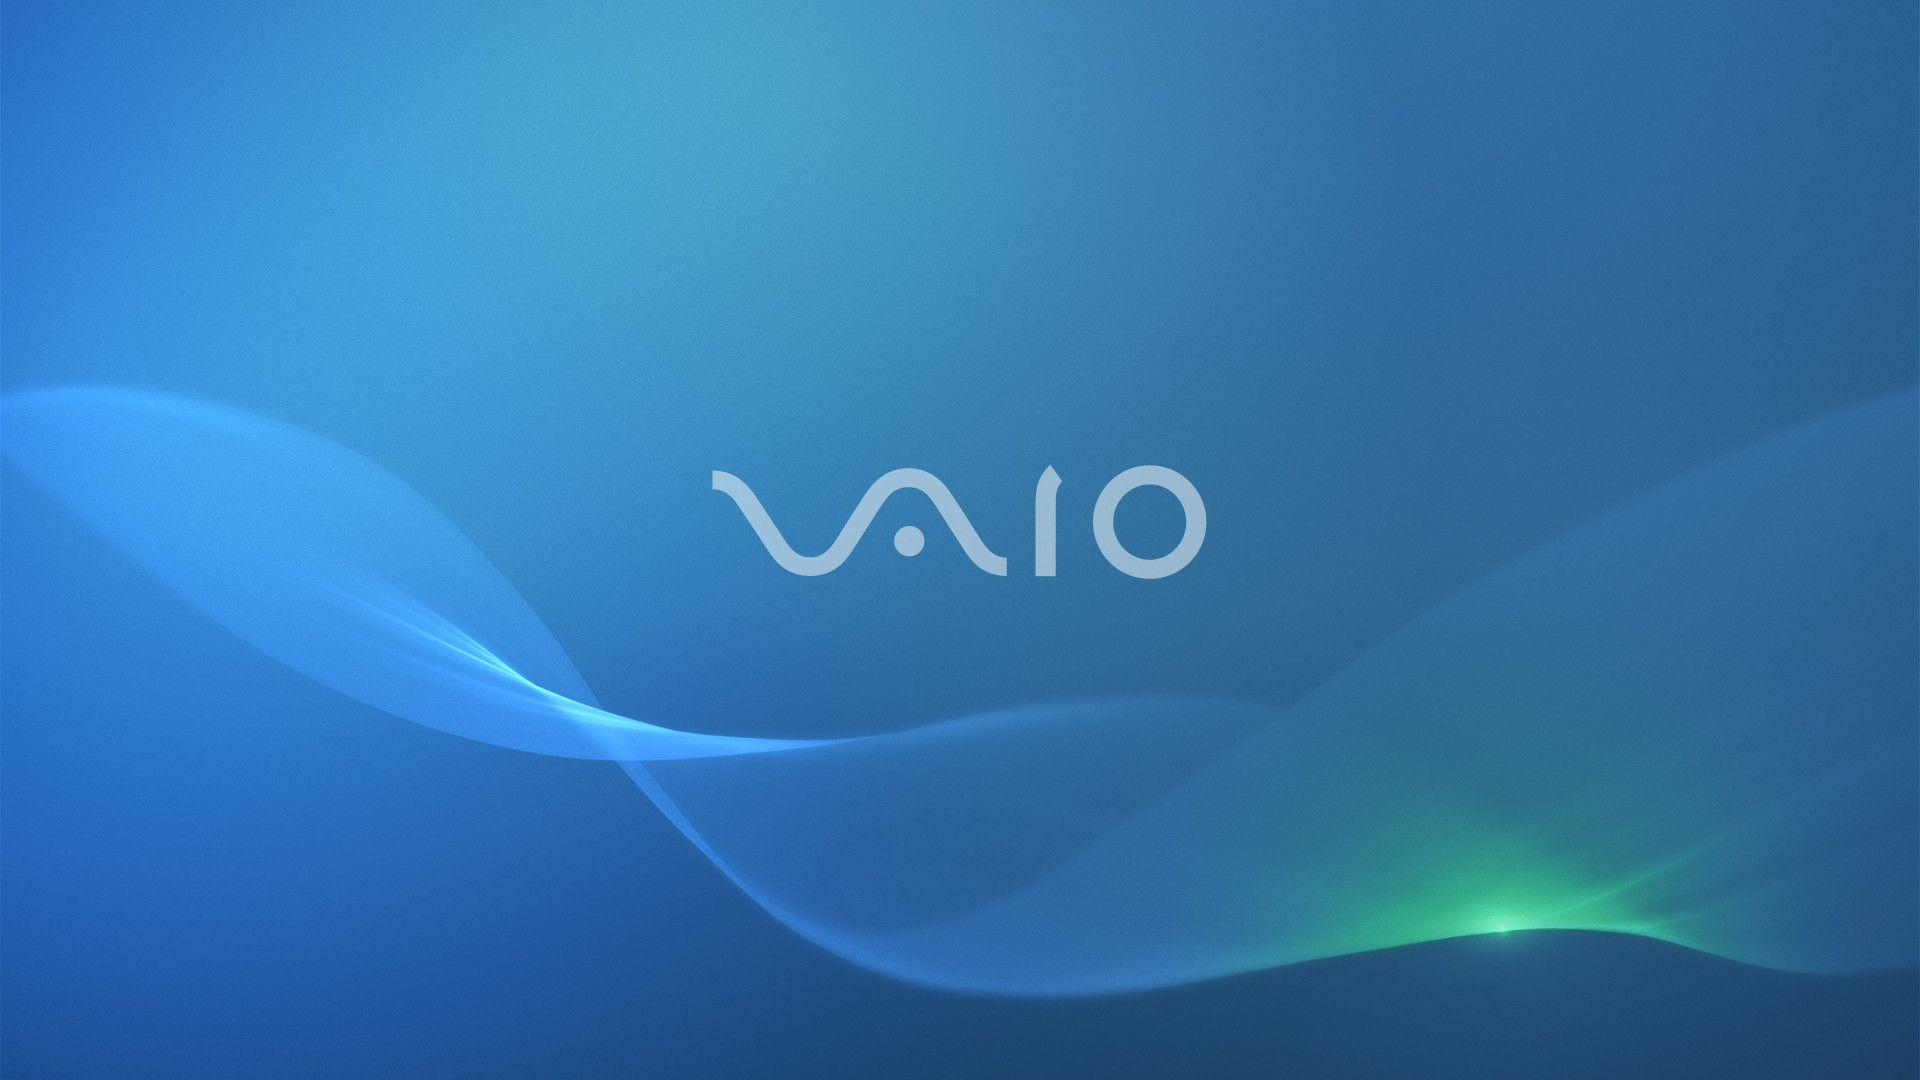 1920x1080 Sony Vaio HD Wallpapers Top Free Sony Vaio HD Backgrounds